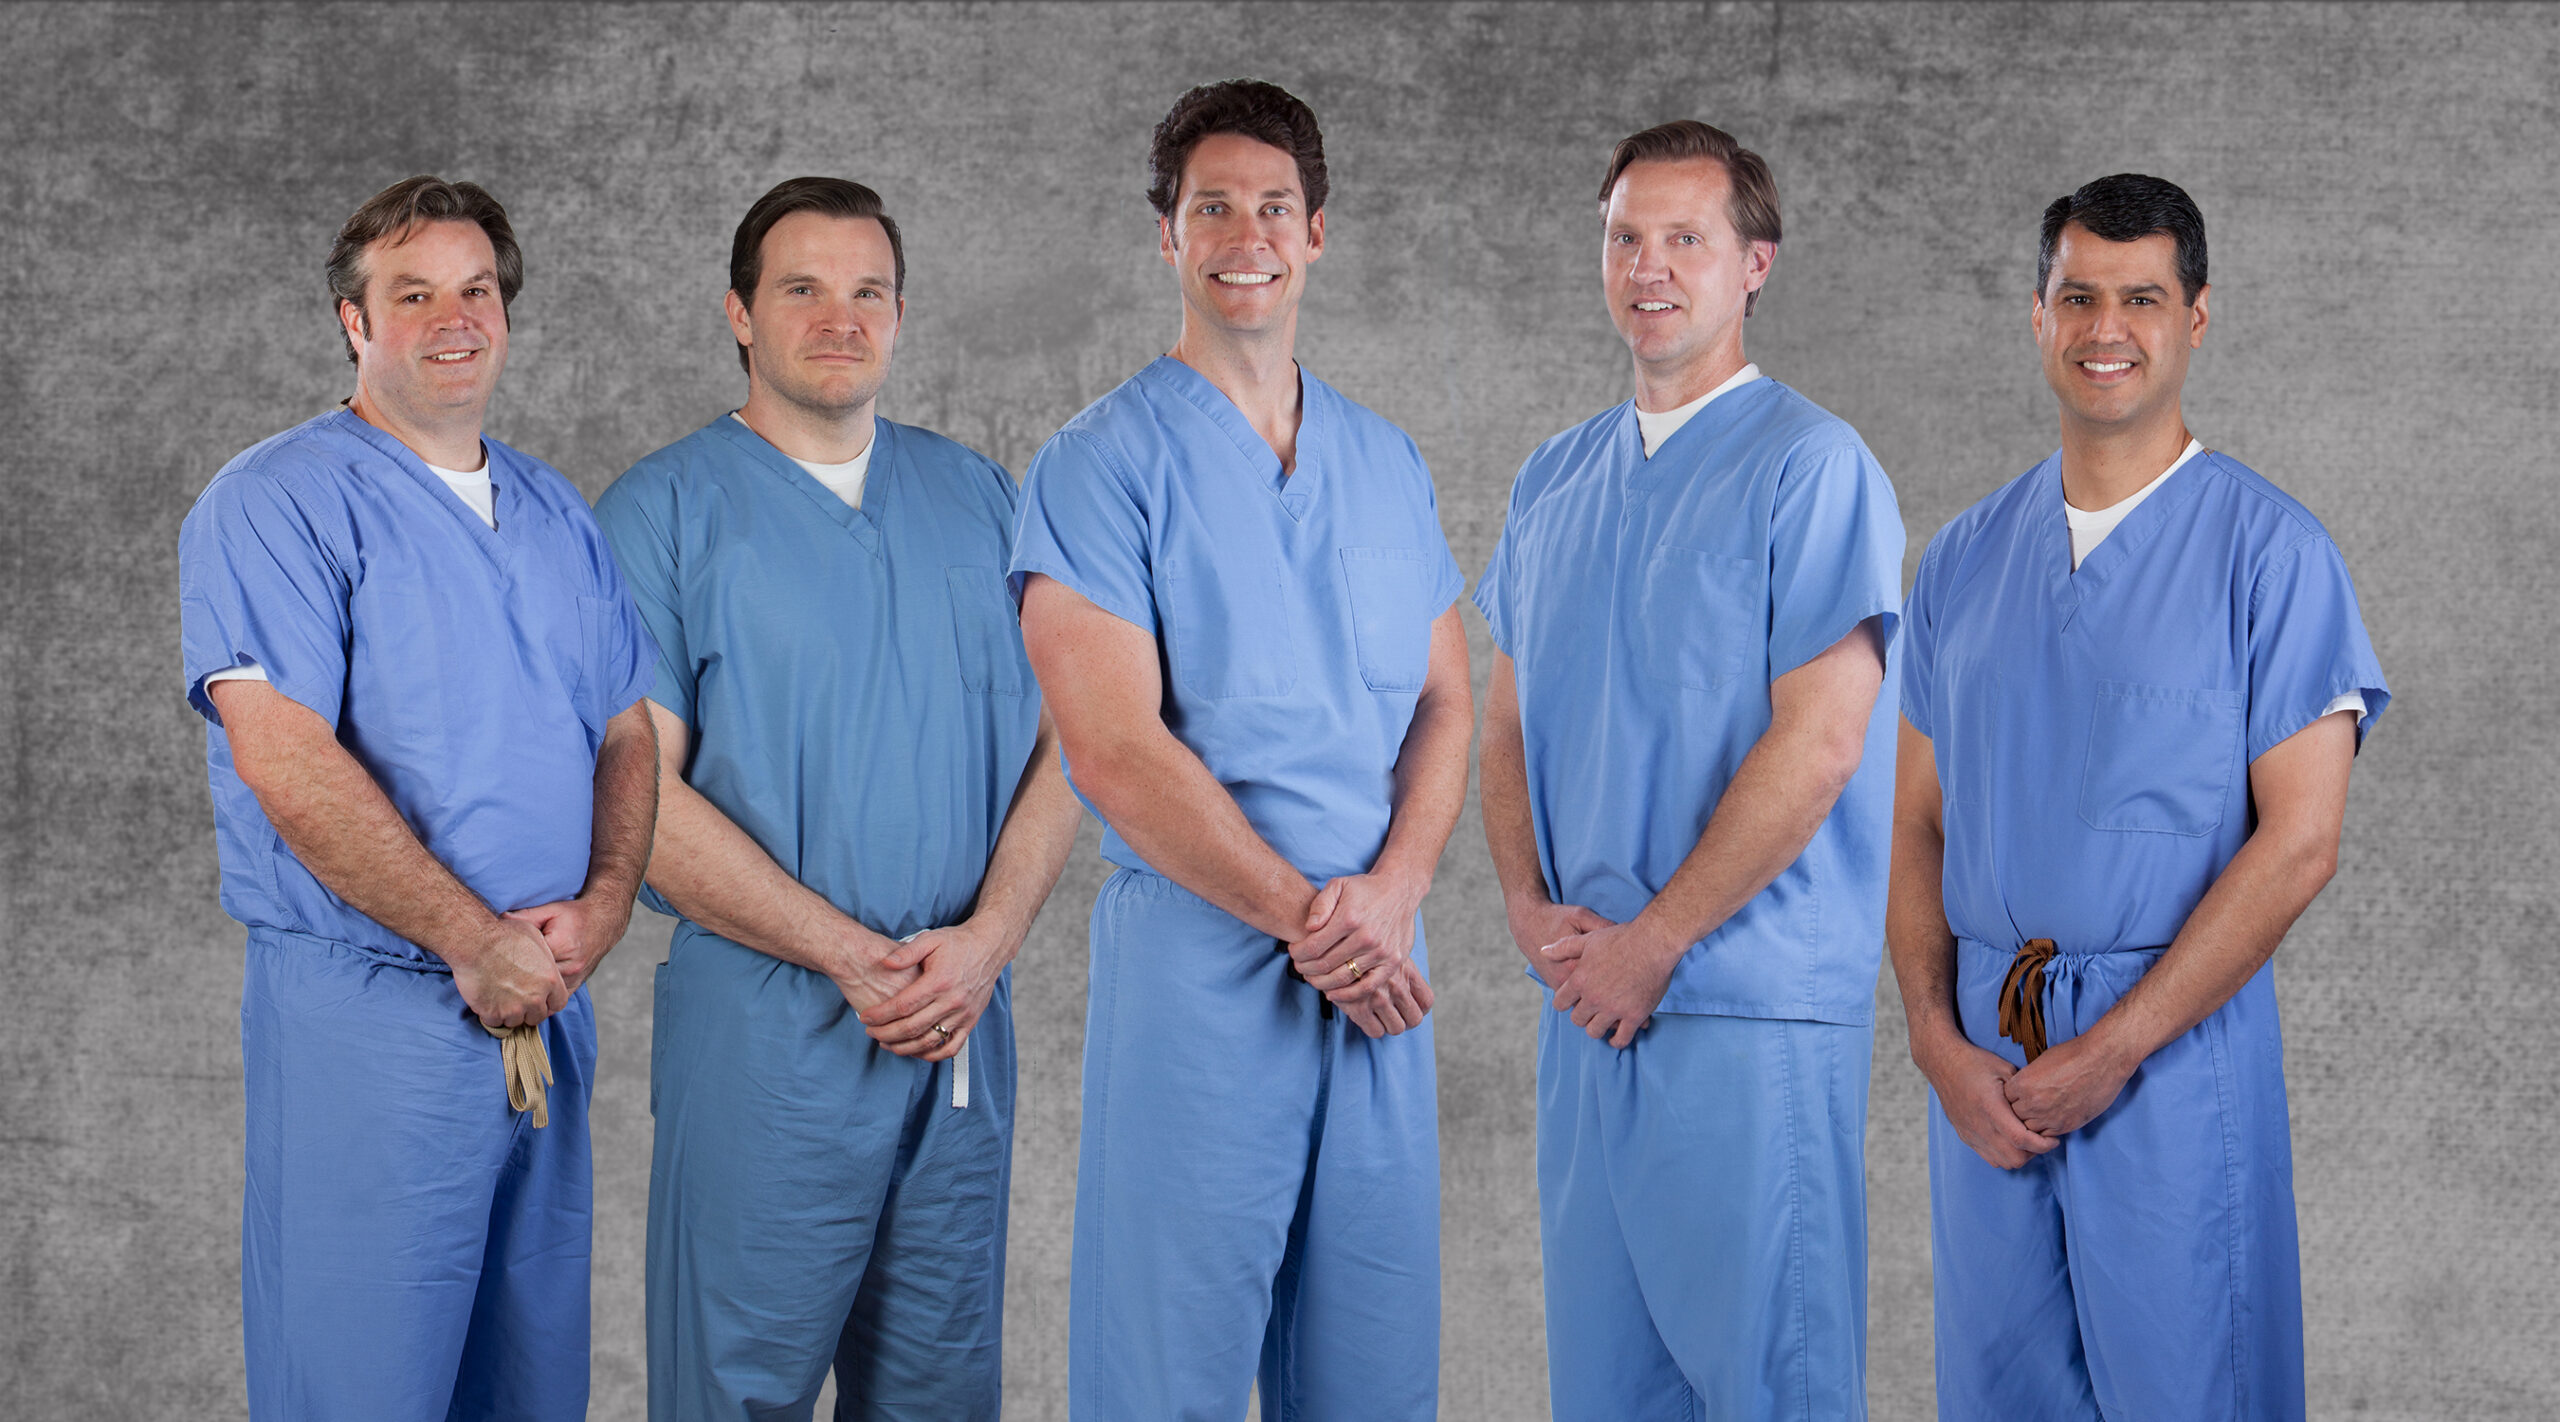 About - Central Texas Surgical Associates